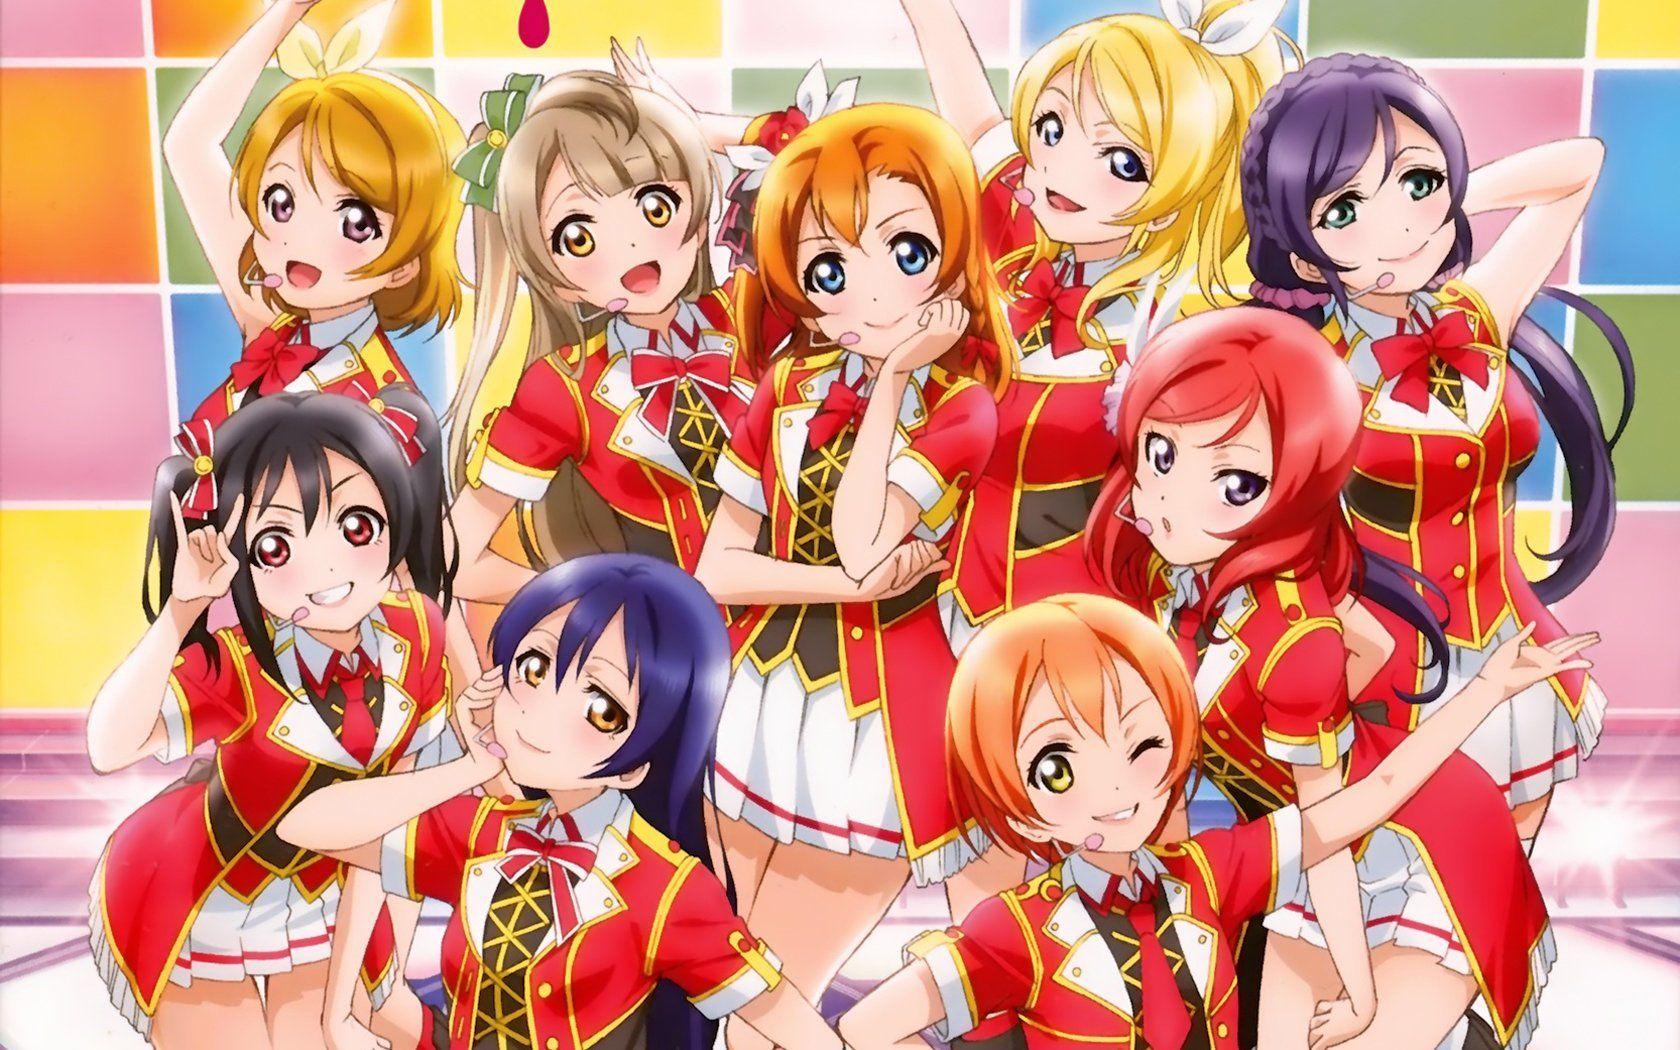 469 Love Live Hd Wallpapers - Love Live School Idol Project Group -  1680x1050 Wallpaper 